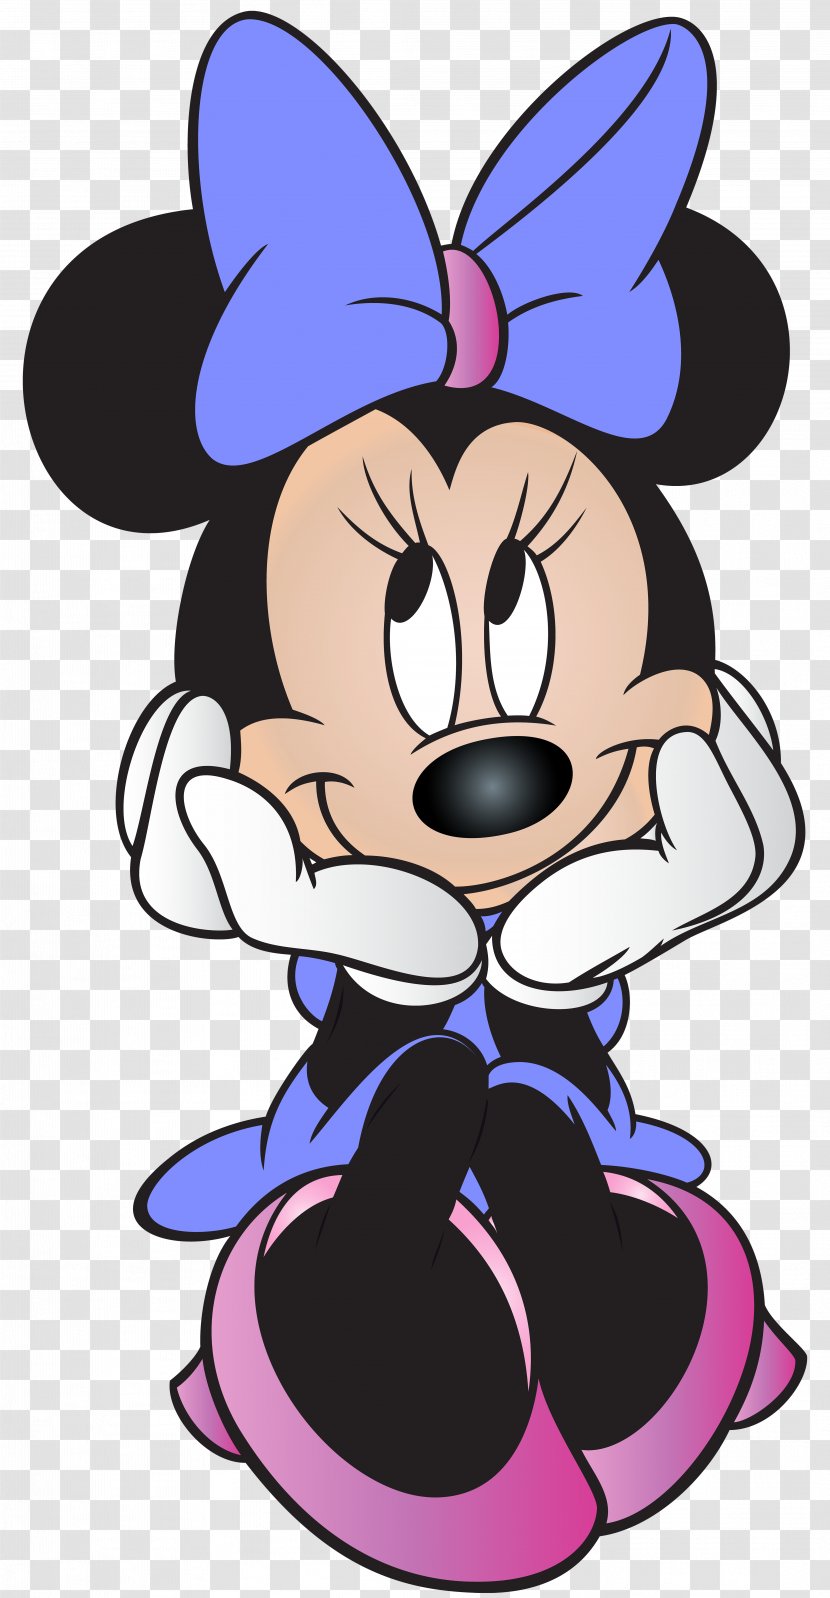 Minnie Mouse Mickey Pluto Donald Duck Goofy - Tree - Free Clip Art Image Transparent PNG